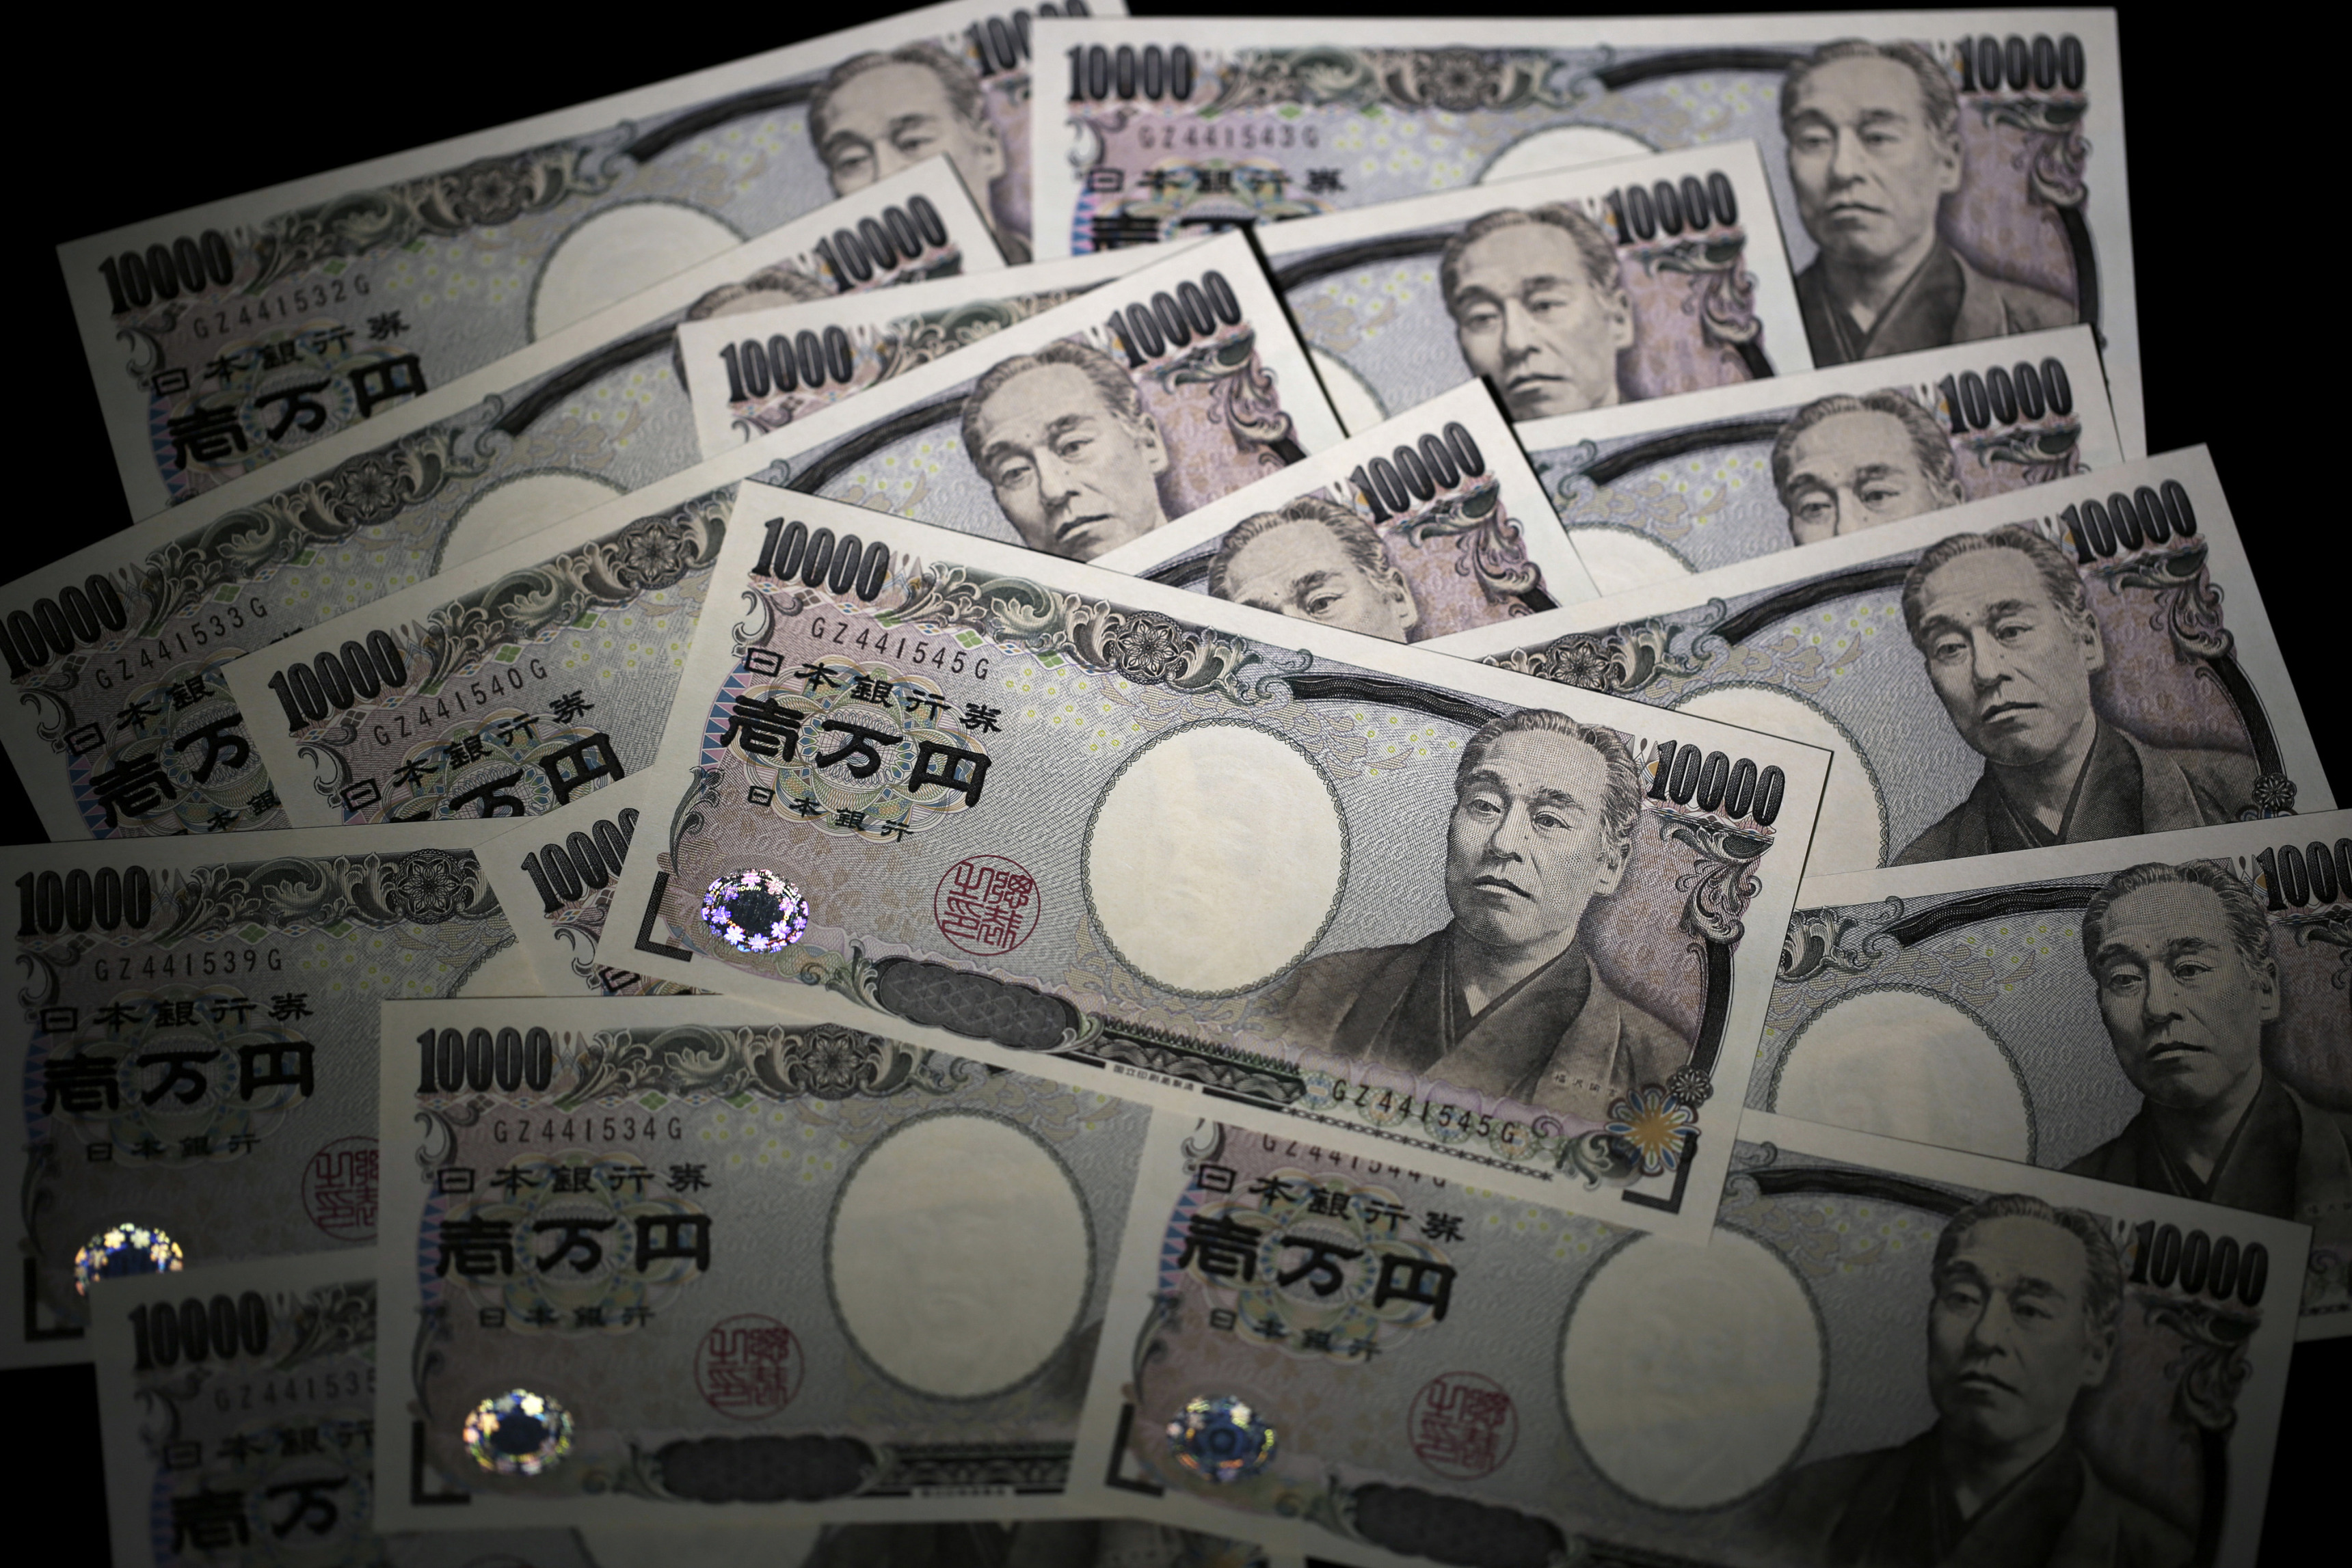 Japanese 10,000 yen banknotes are arranged for a photograph in Tokyo, Japan, on Wednesday, July 22, 2015.  The yen slipped 0.1 percent to 124.03 per dollar after better-than-expected data on U.S. housing and a continuing commodity rout boosted the greenback.